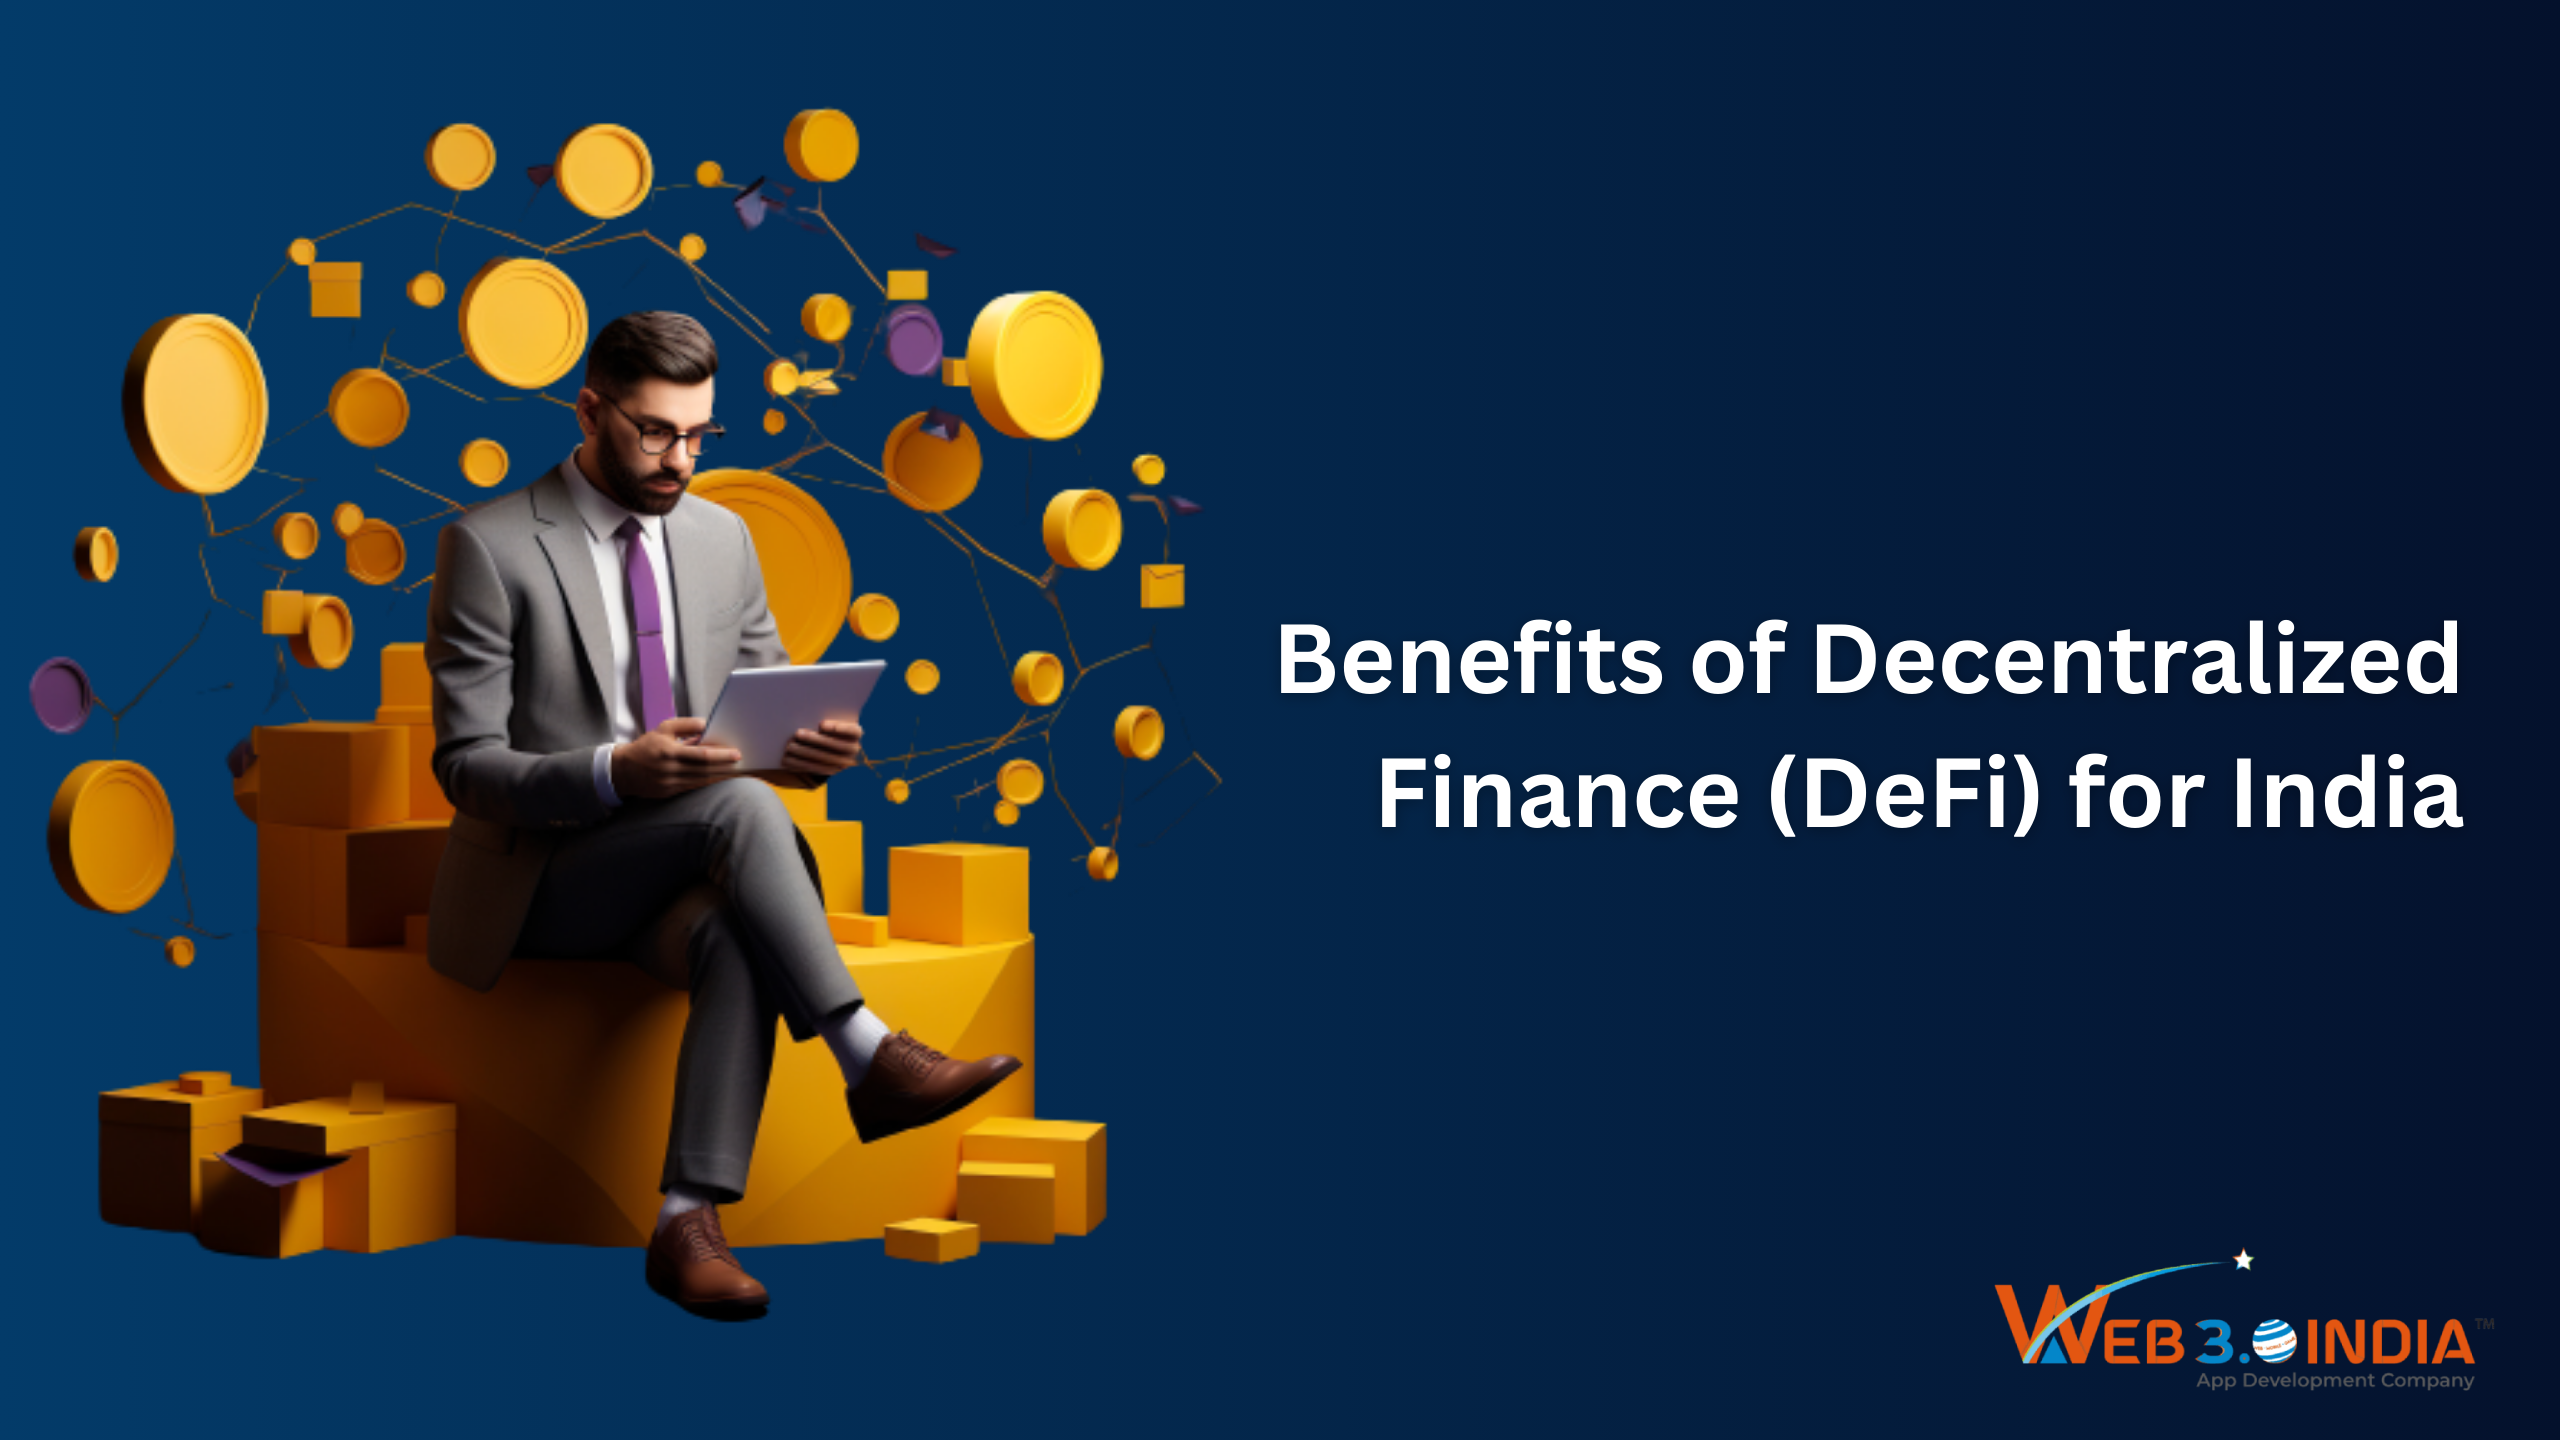 Benefits of Decentralized Finance (DeFi) for India - Web 3.0 India